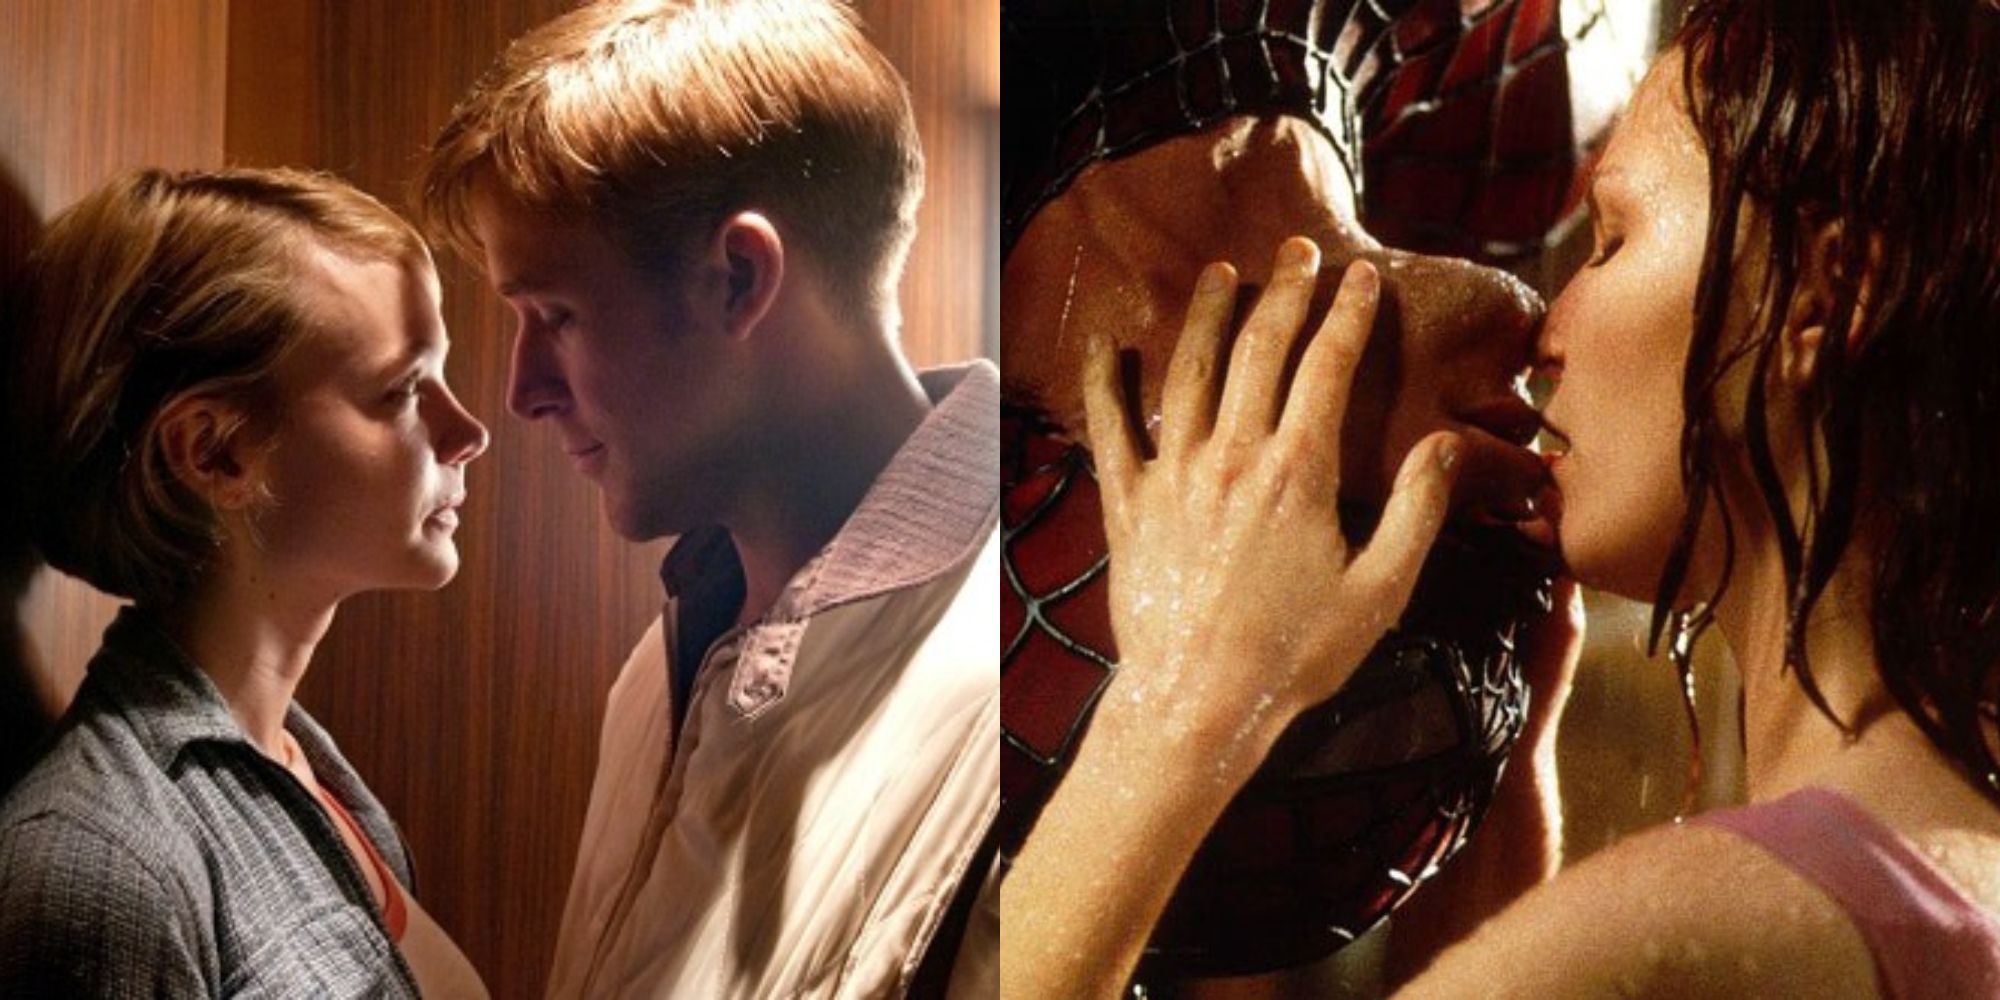 Split image showing kissing scenes from Drive and Spider-Man.